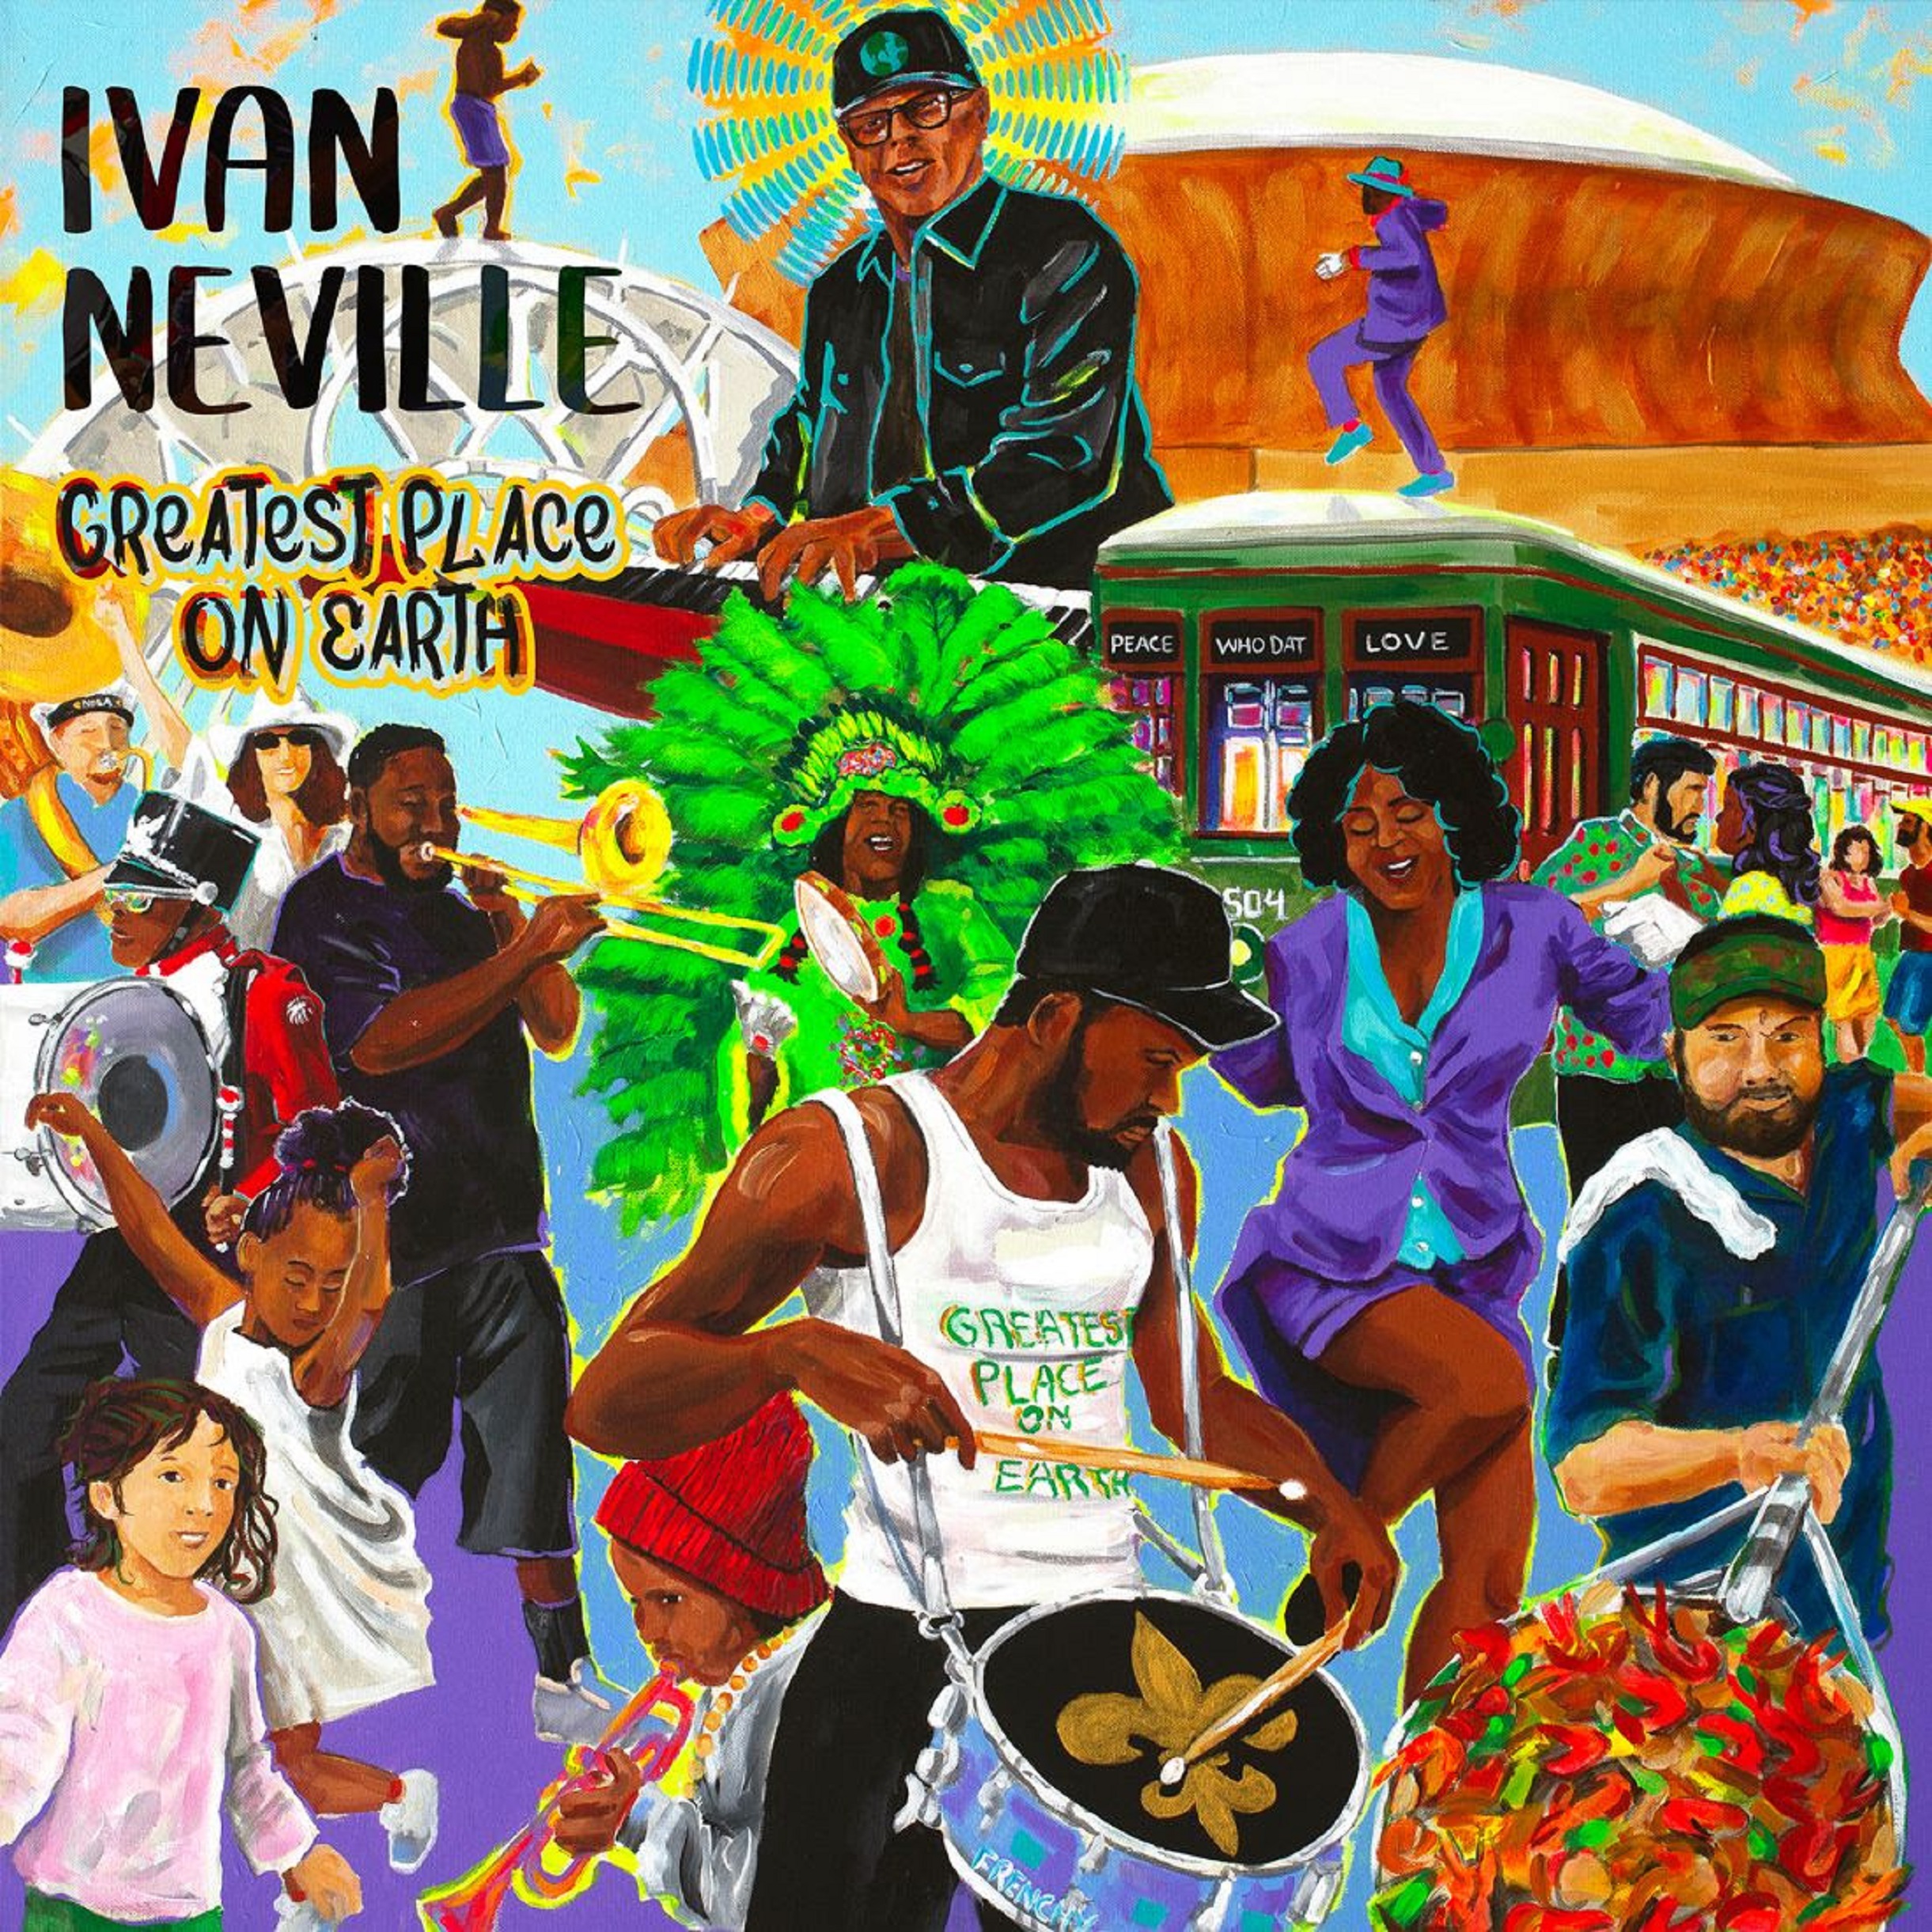 Ahead of Mardi Gras, Ivan Neville, Trombone Shorty Unveil Homage To New Orleans